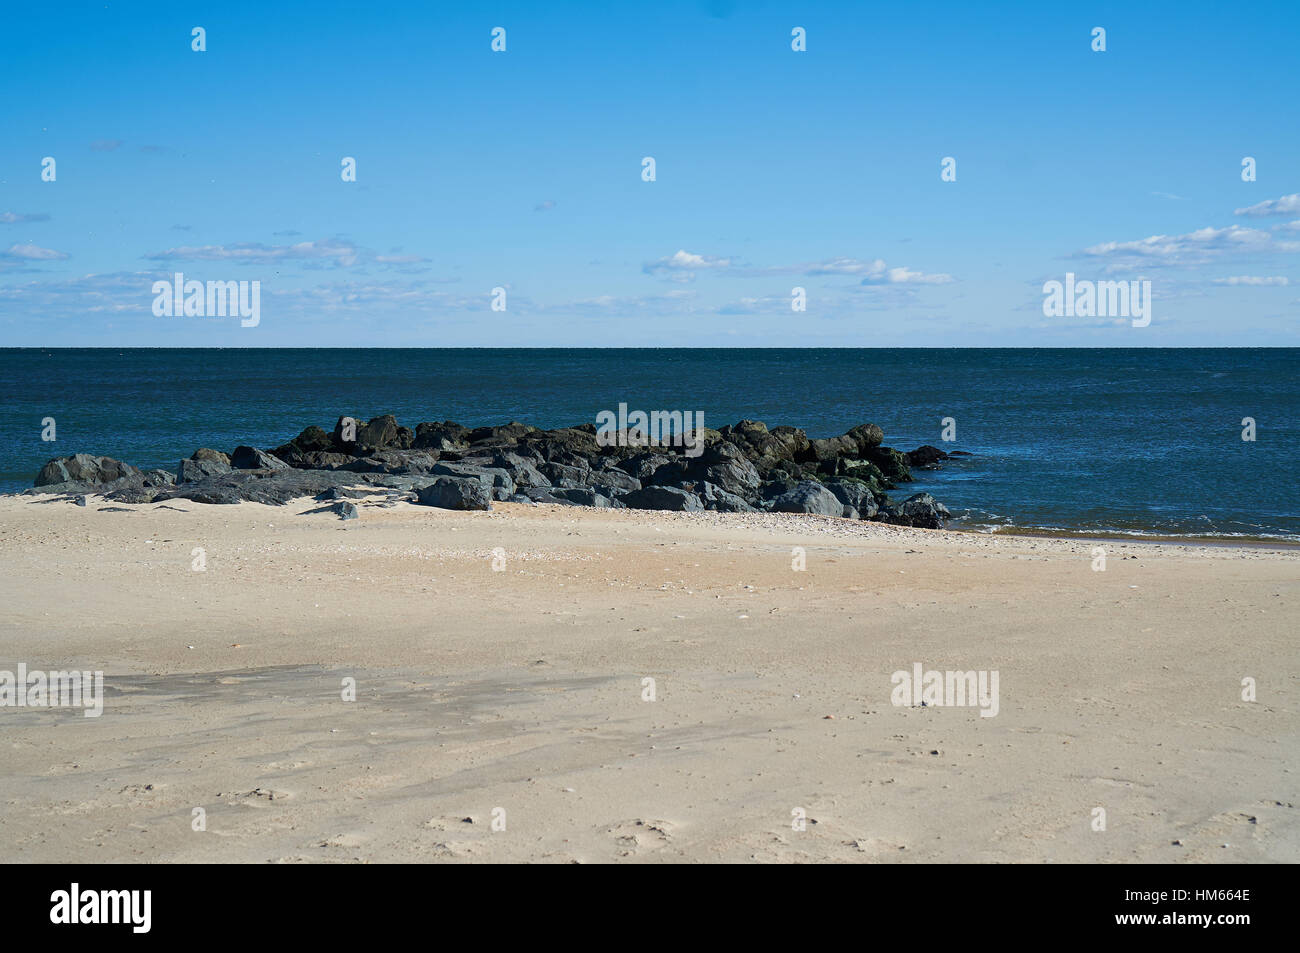 coastline including beach and rocky jetty with ocean horizon and blue sky and clouds Stock Photo